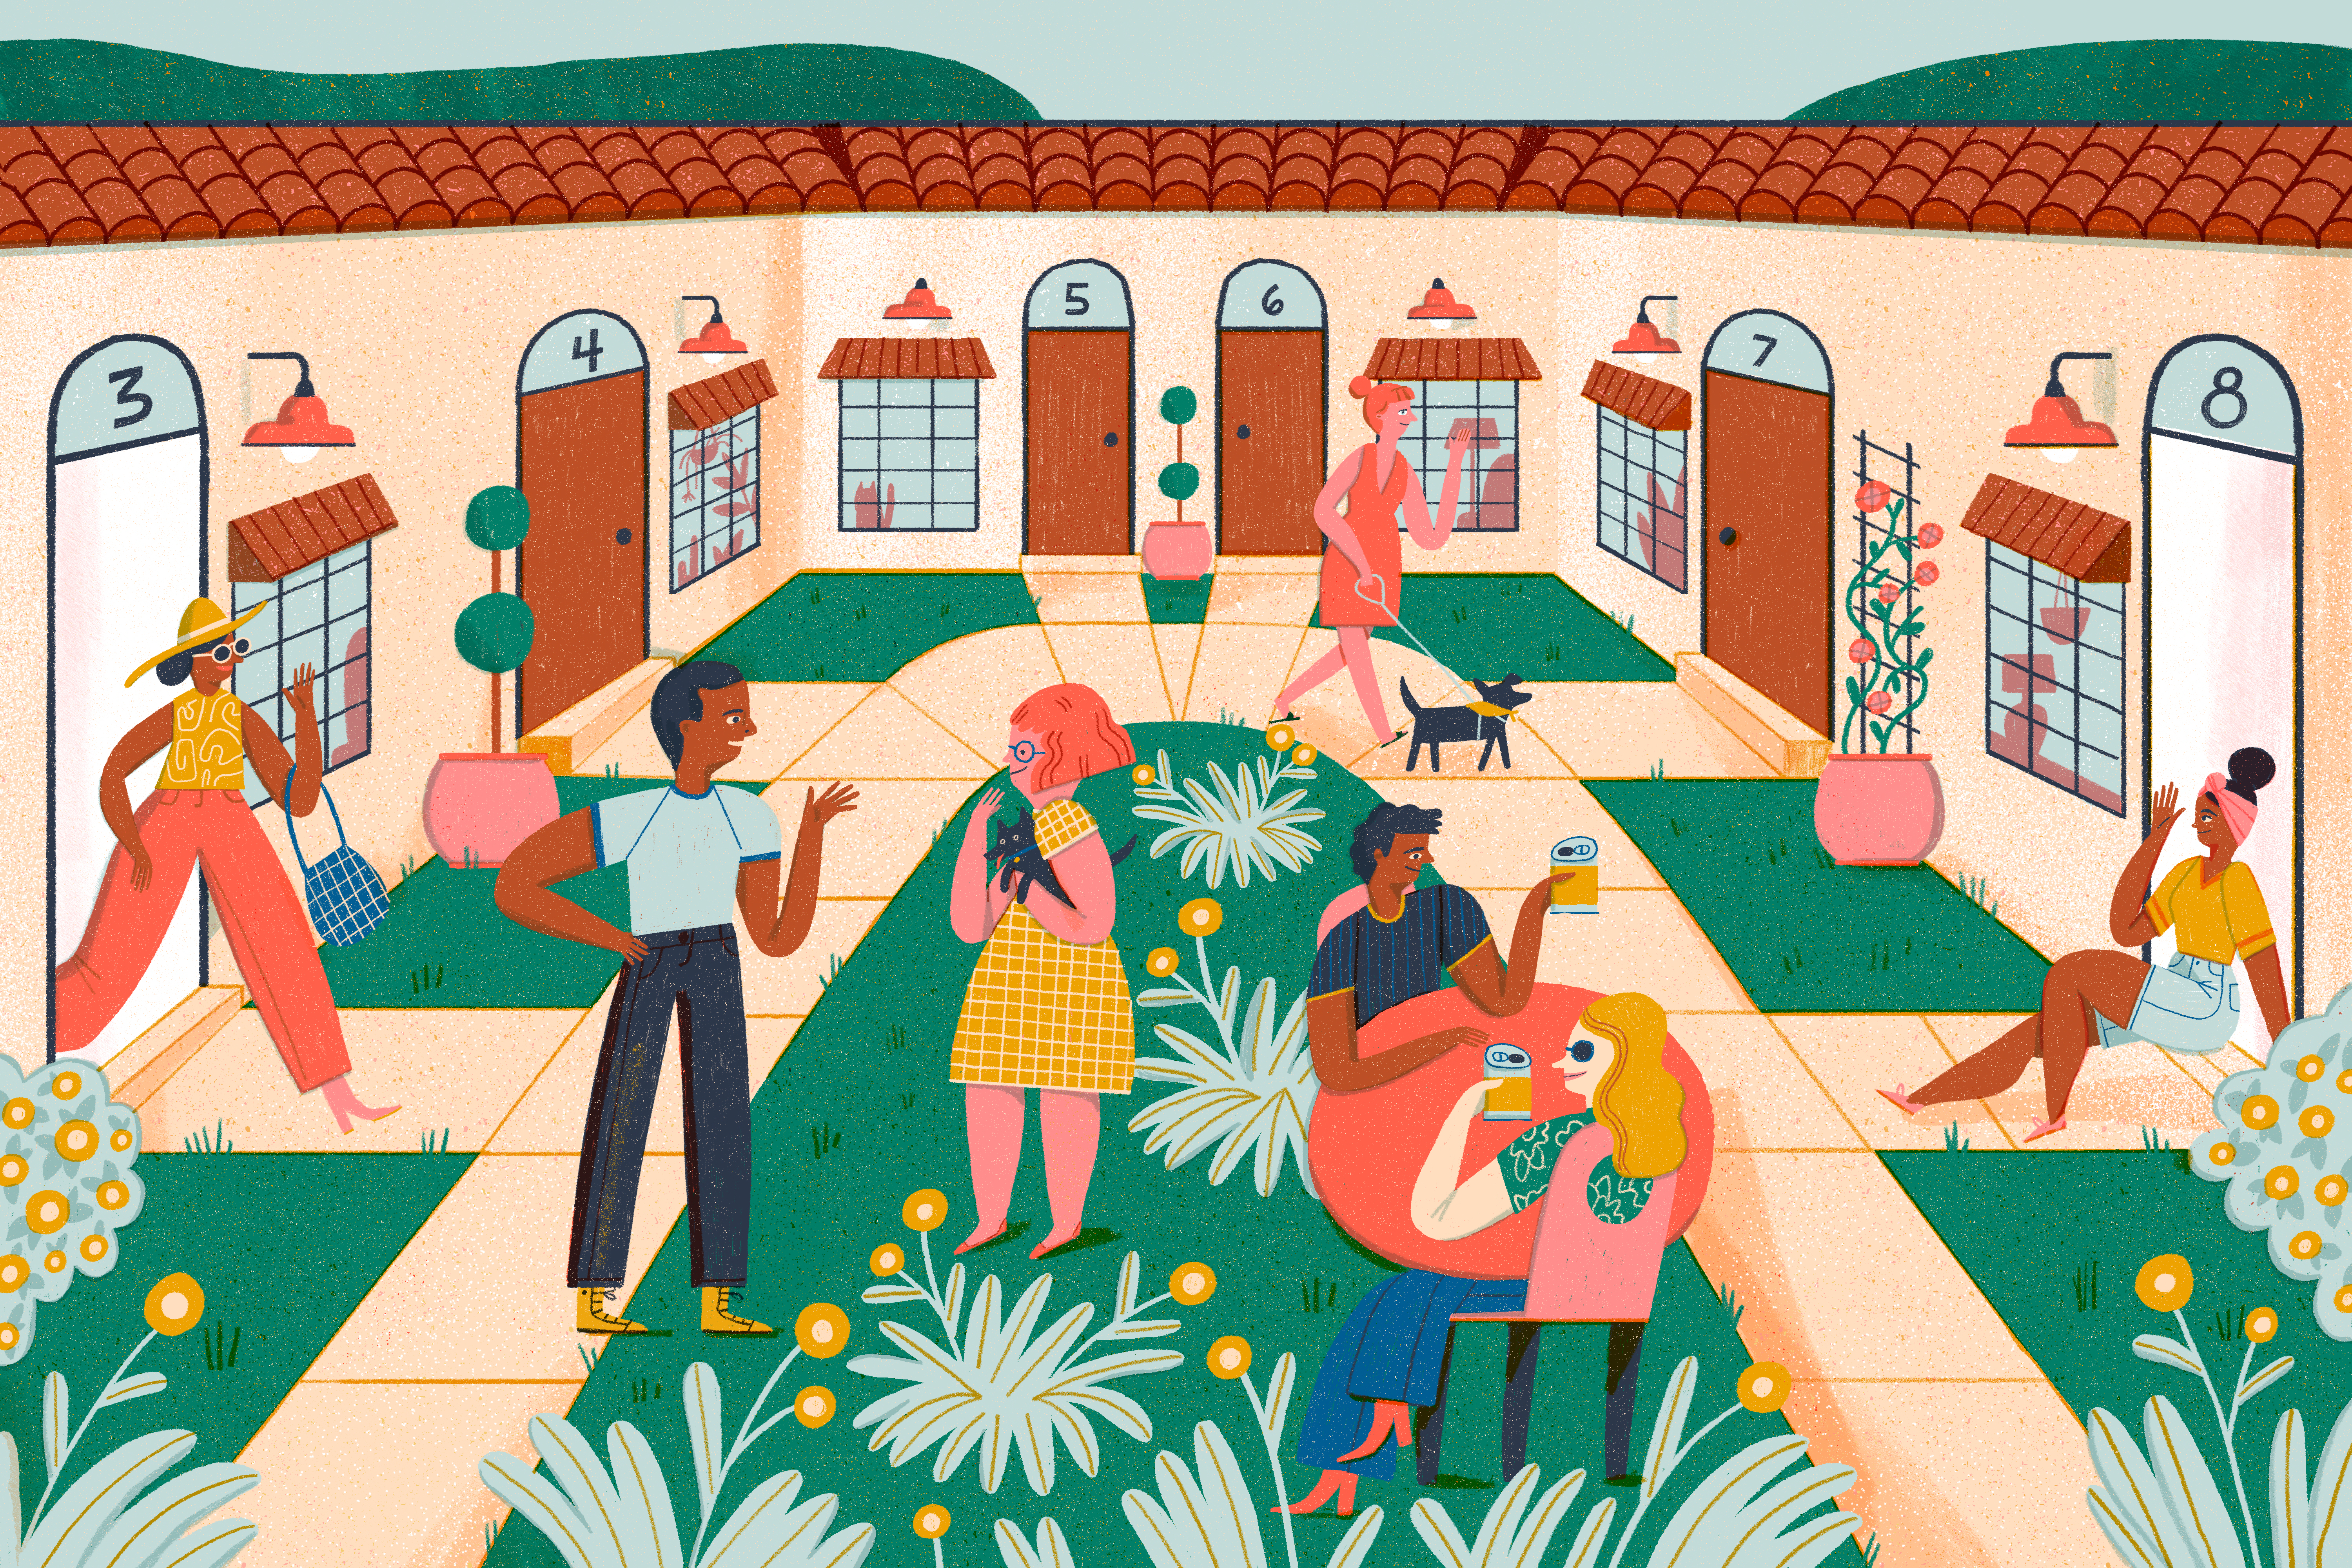 A bustling courtyard scene with various apartment doors and sidewalks all leading to a center loop of sidewalk. Neighbors are outside chatting and catching up over drinks at a small outdoor table, people are coming and going from their front doors with pets or bags from errands. The atmosphere is friendly and lively. Illustration.